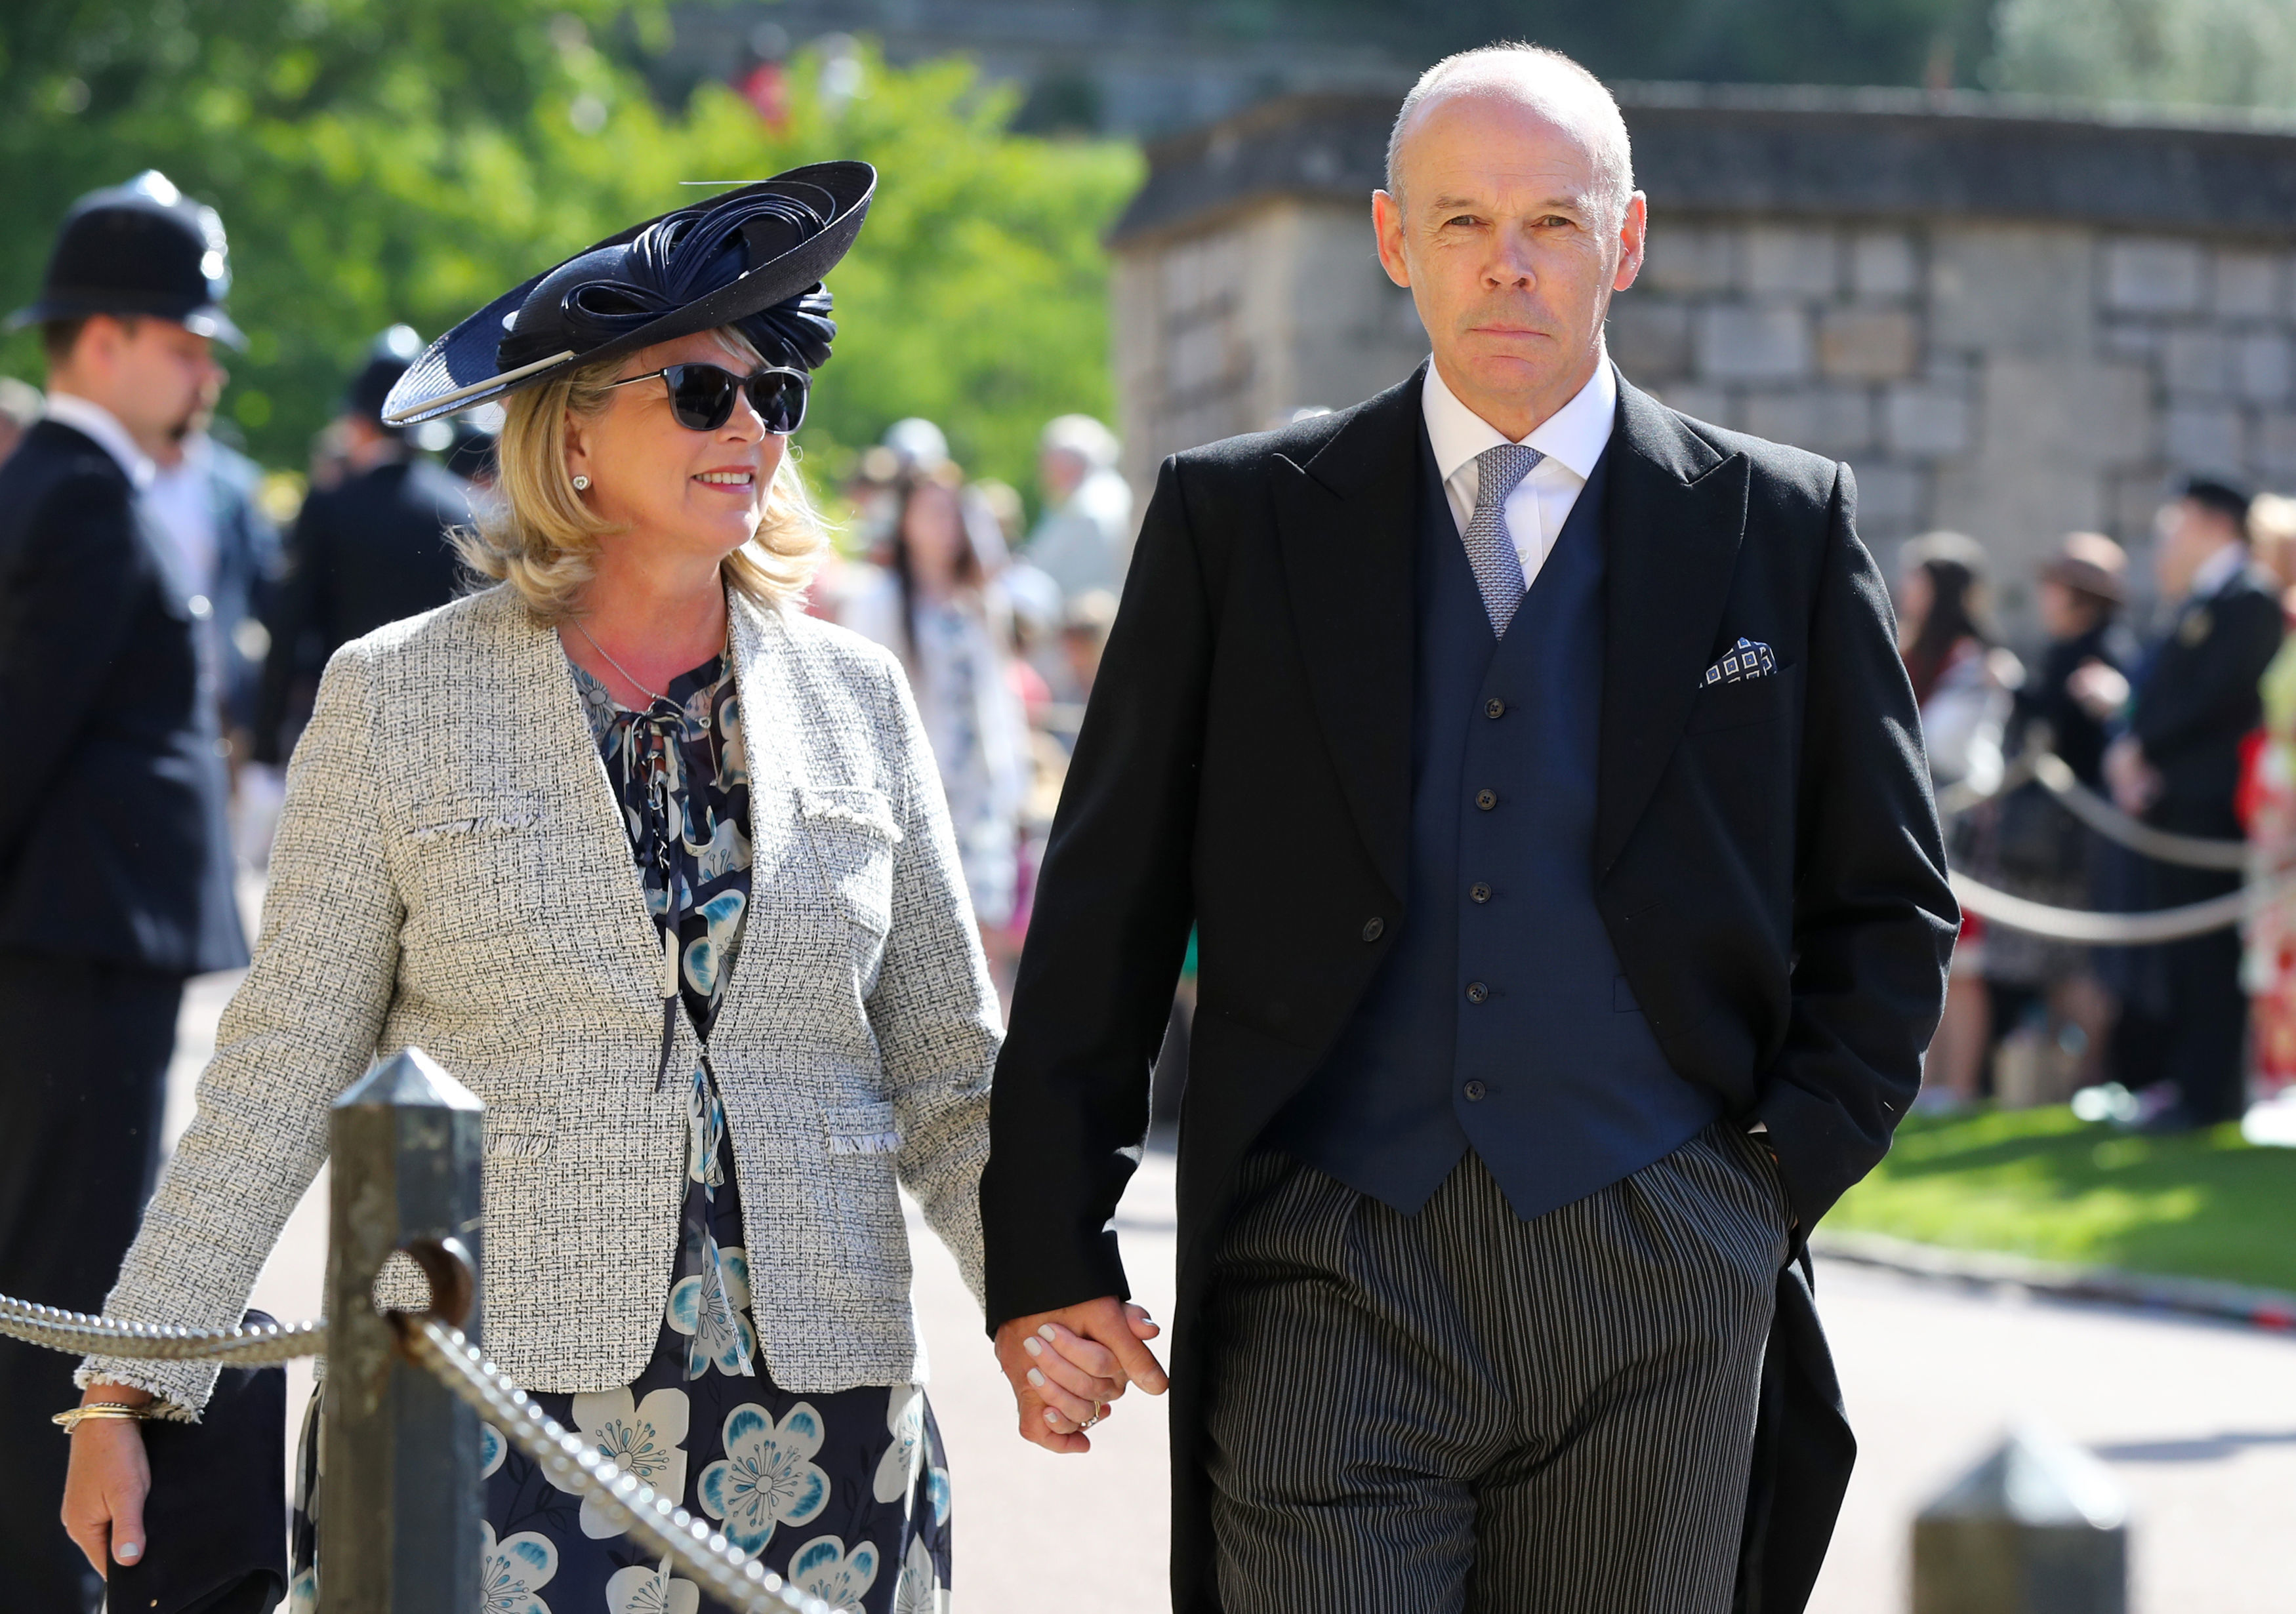 Sir Clive Woodward was joined by Jayne Williams (Gareth Fuller/PA)